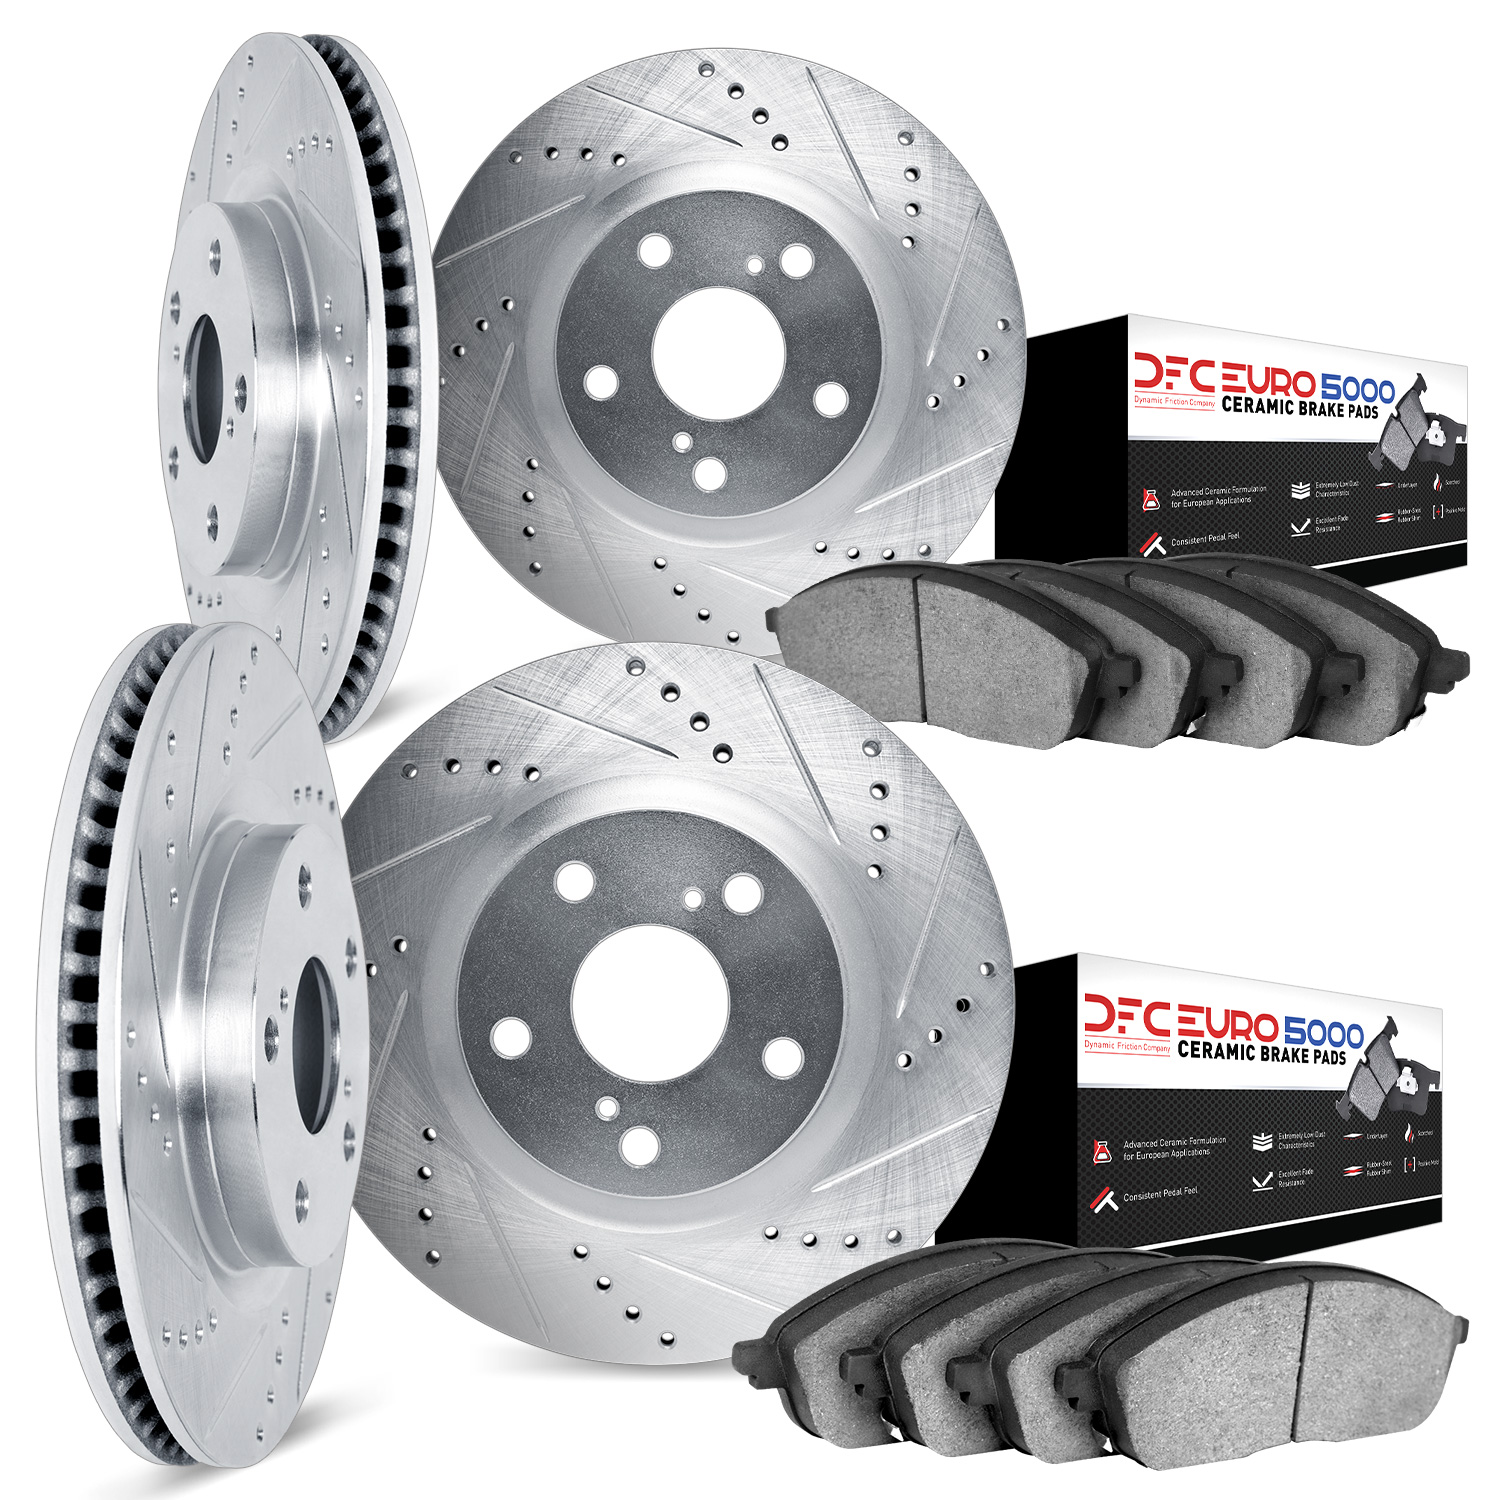 7604-31025 Drilled/Slotted Brake Rotors w/5000 Euro Ceramic Brake Pads Kit [Silver], 2013-2020 BMW, Position: Front and Rear